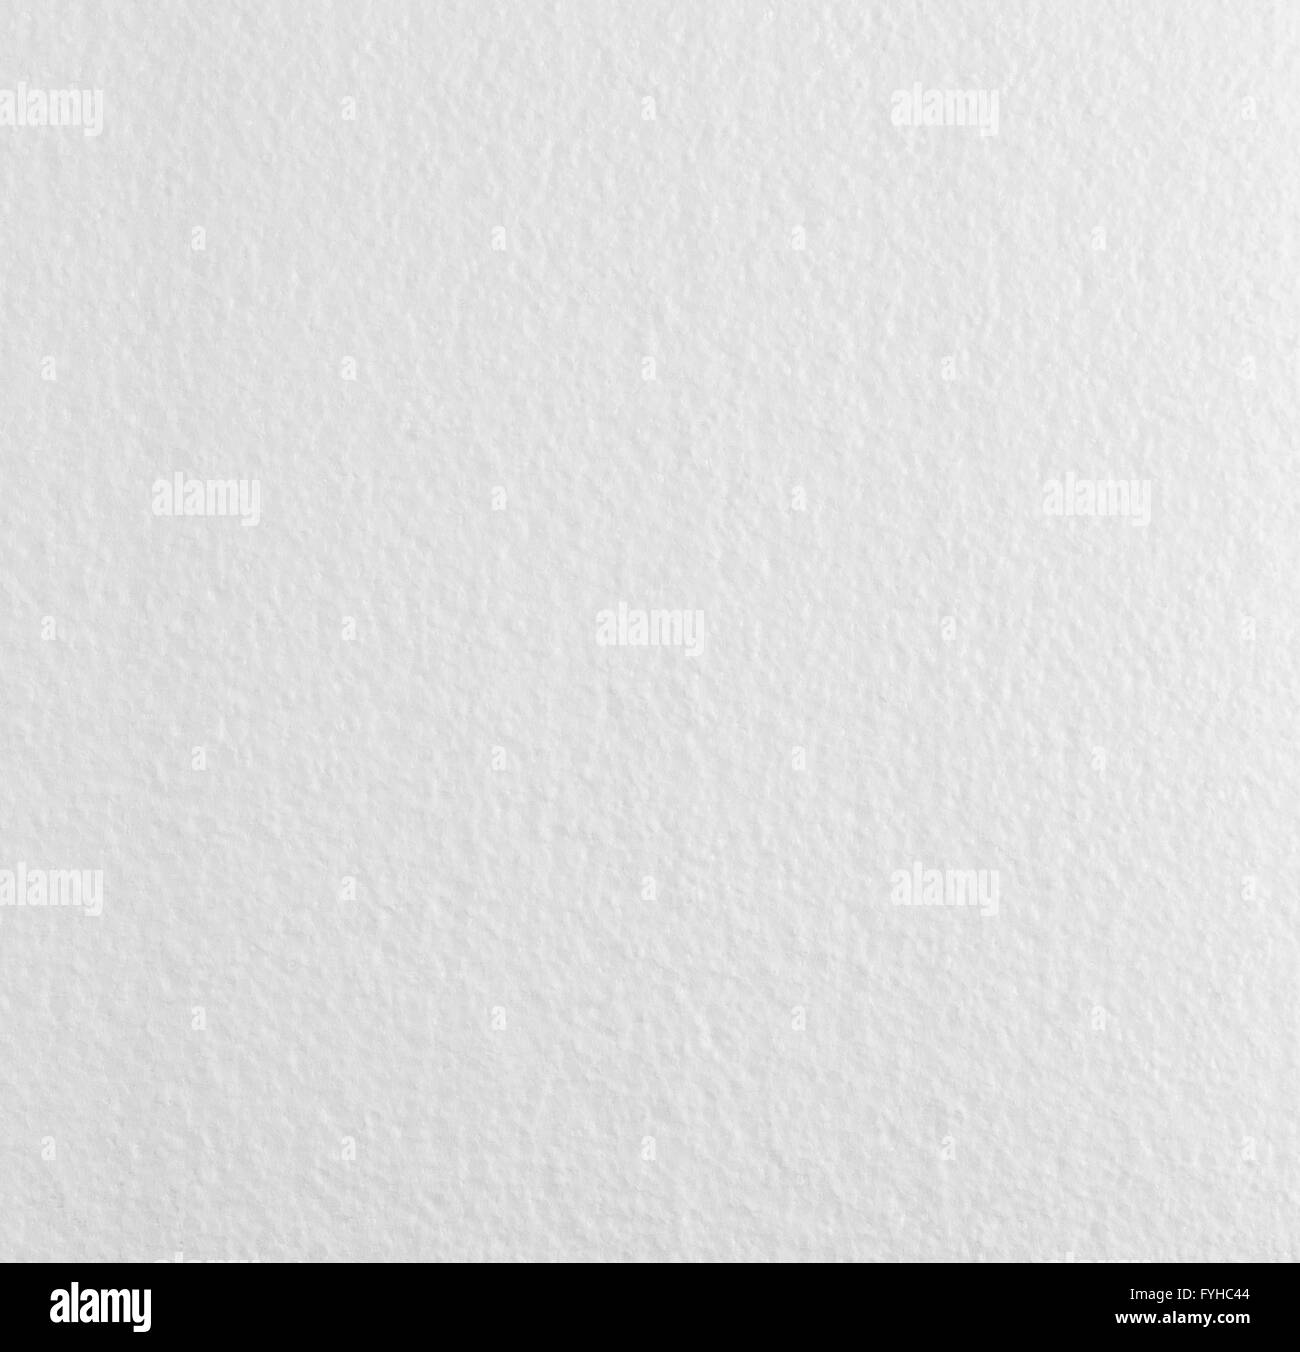 White Packing Styrofoam Texture Background with Copy Space. Stock Photo